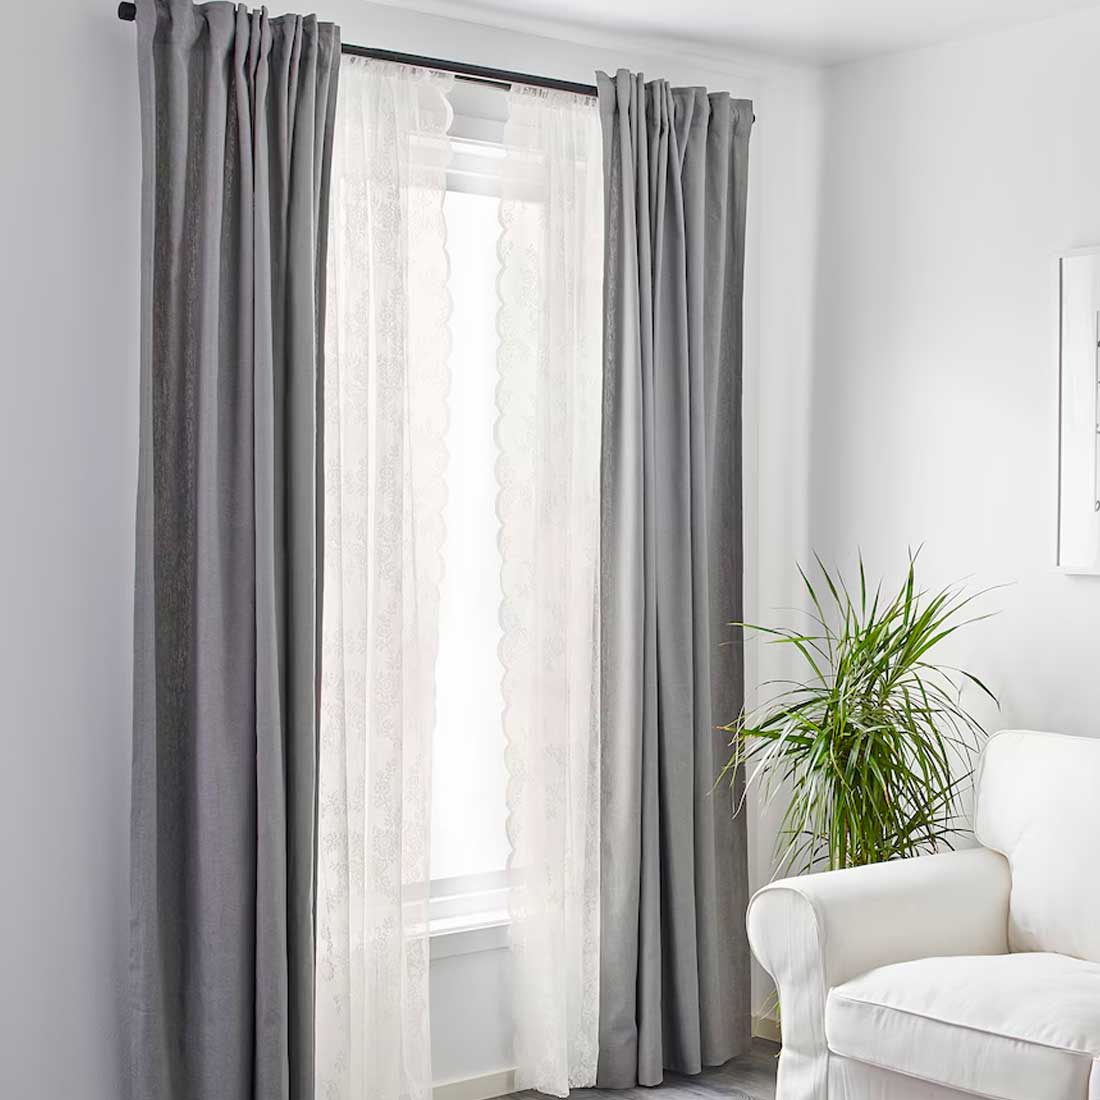 Lace curtains, 1 pair, off white